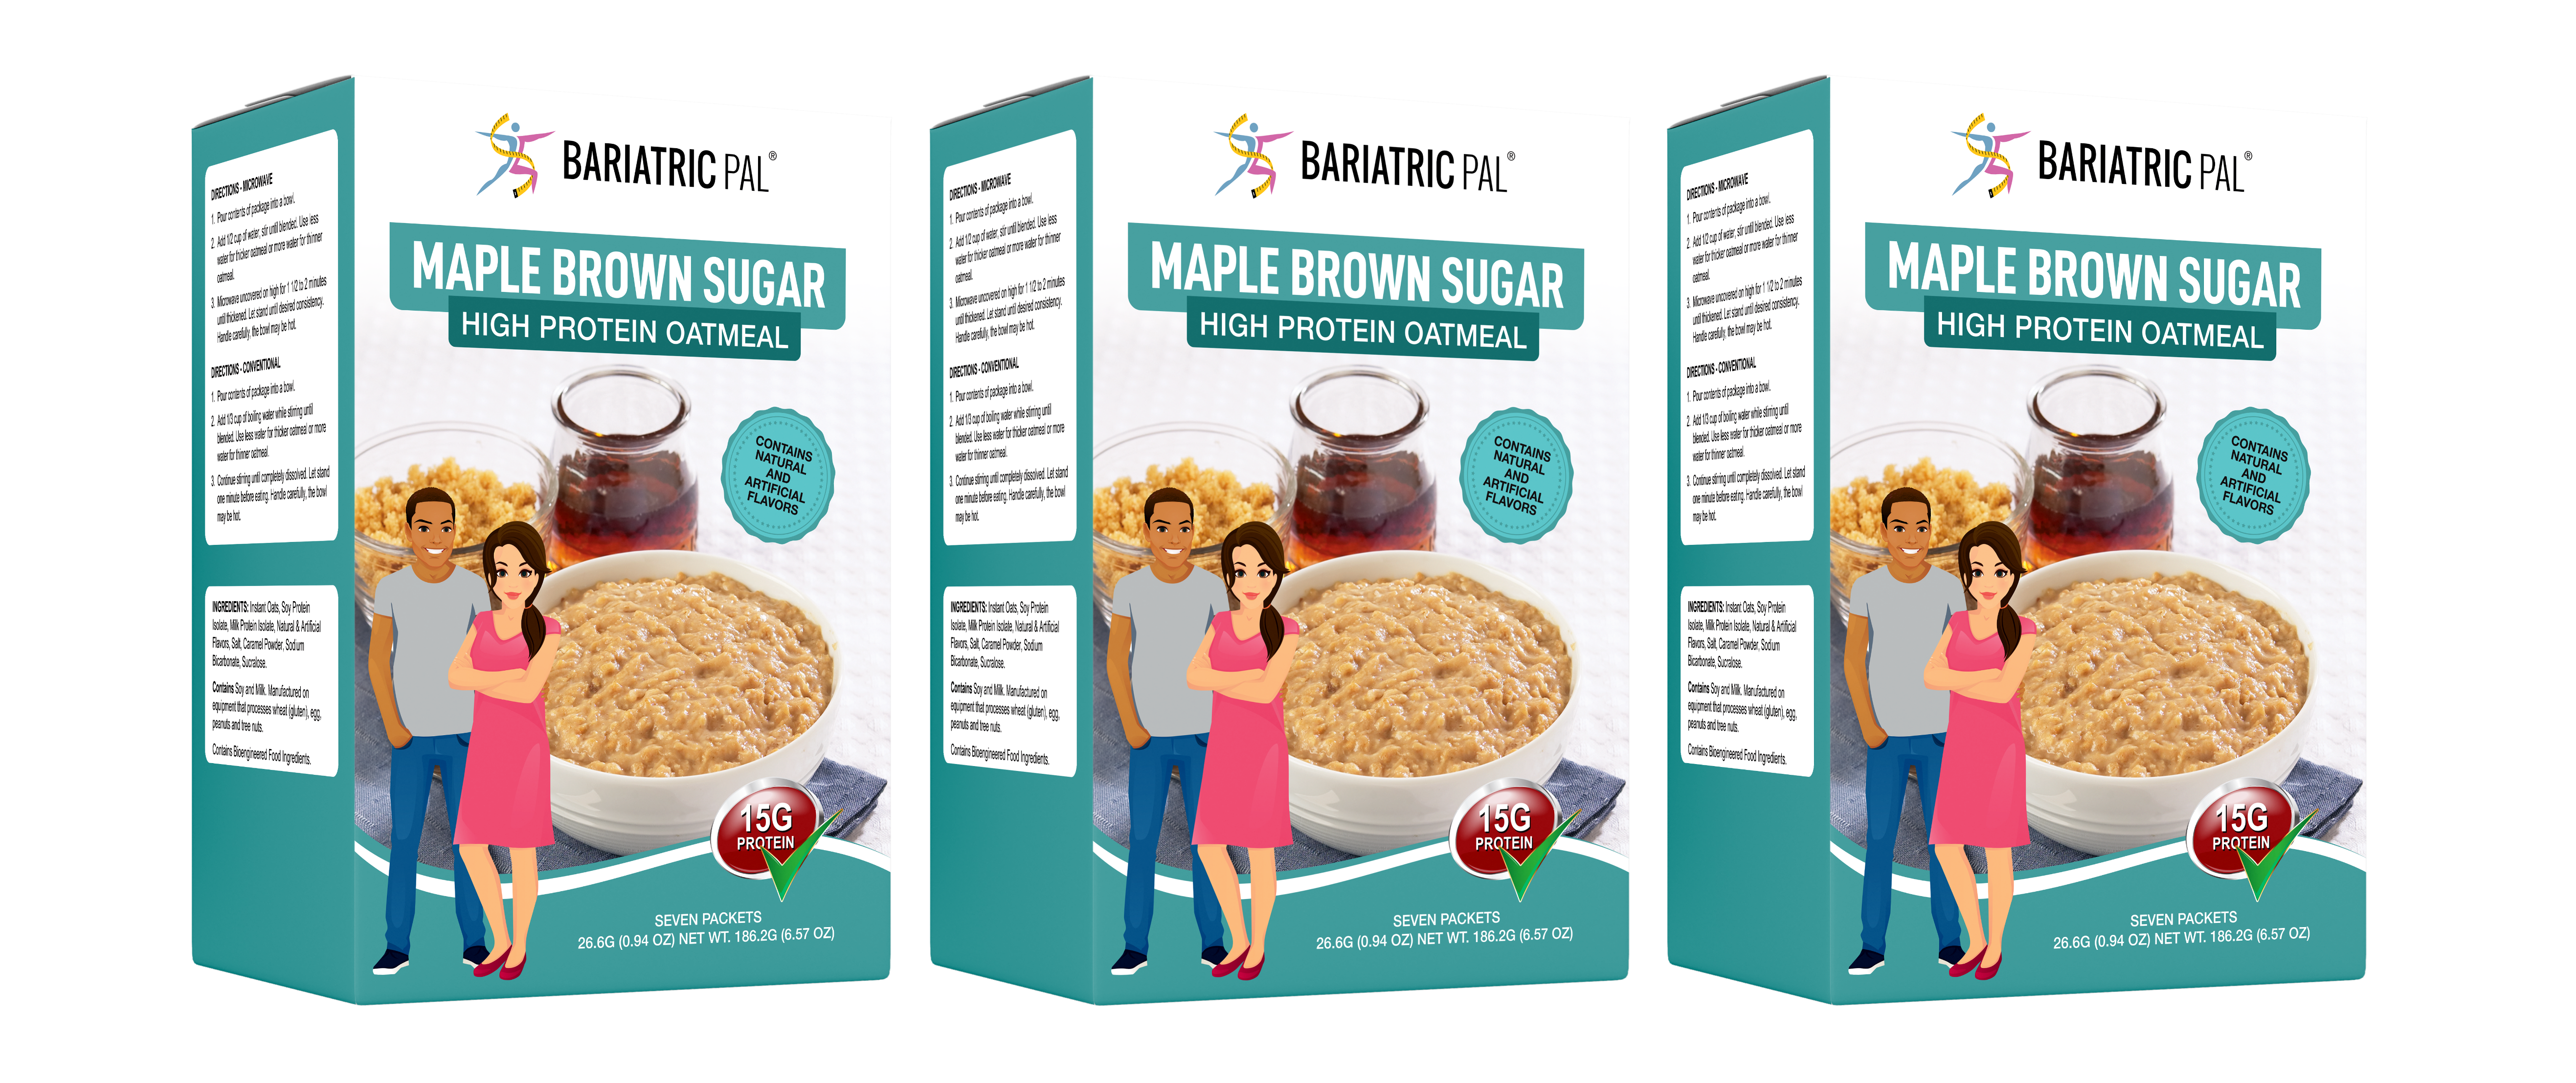 BariatricPal Hot Protein Breakfast - Maple Brown Sugar Oatmeal - High-quality Breakfast by BariatricPal at 